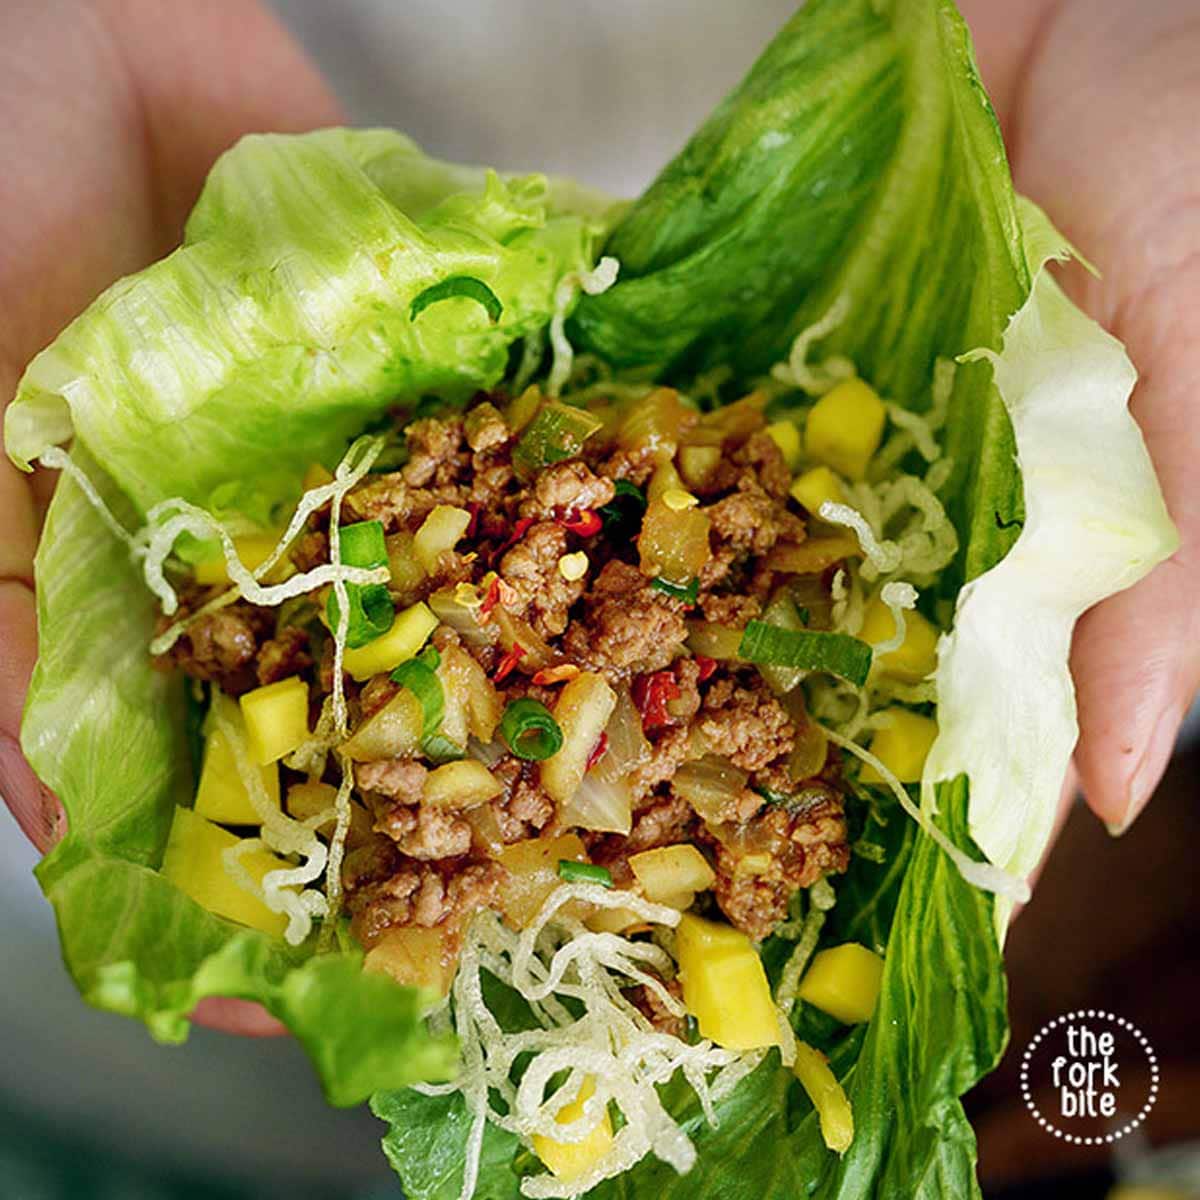 A copycat PF Chang Lettuce wrap recipe that you can easily make in just 20 minutes. So good, healthy and budget-friendly. These Asian Chicken Lettuce Wraps will save you a trip to P.F. Chang's.